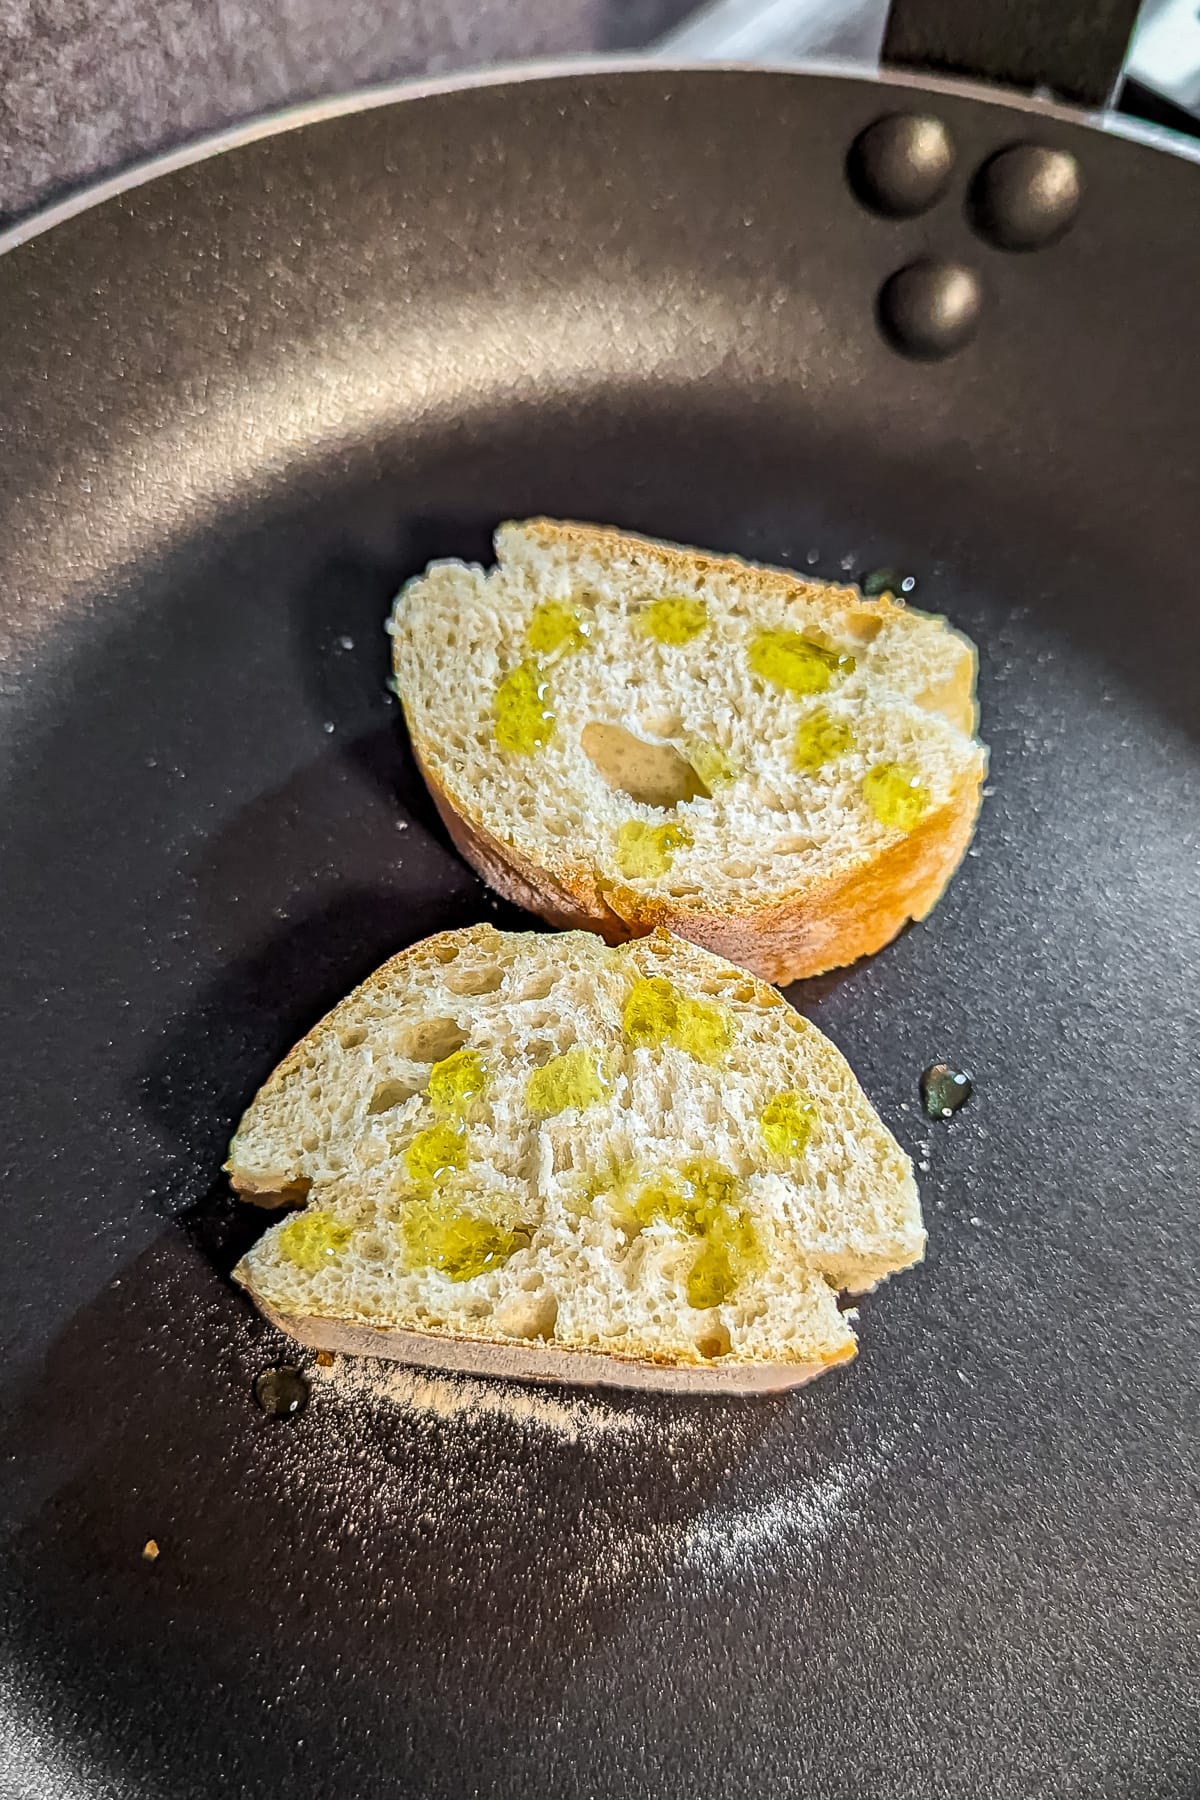 Toasting 2 bread slices on a frying pan with a few splashes of olive oil.